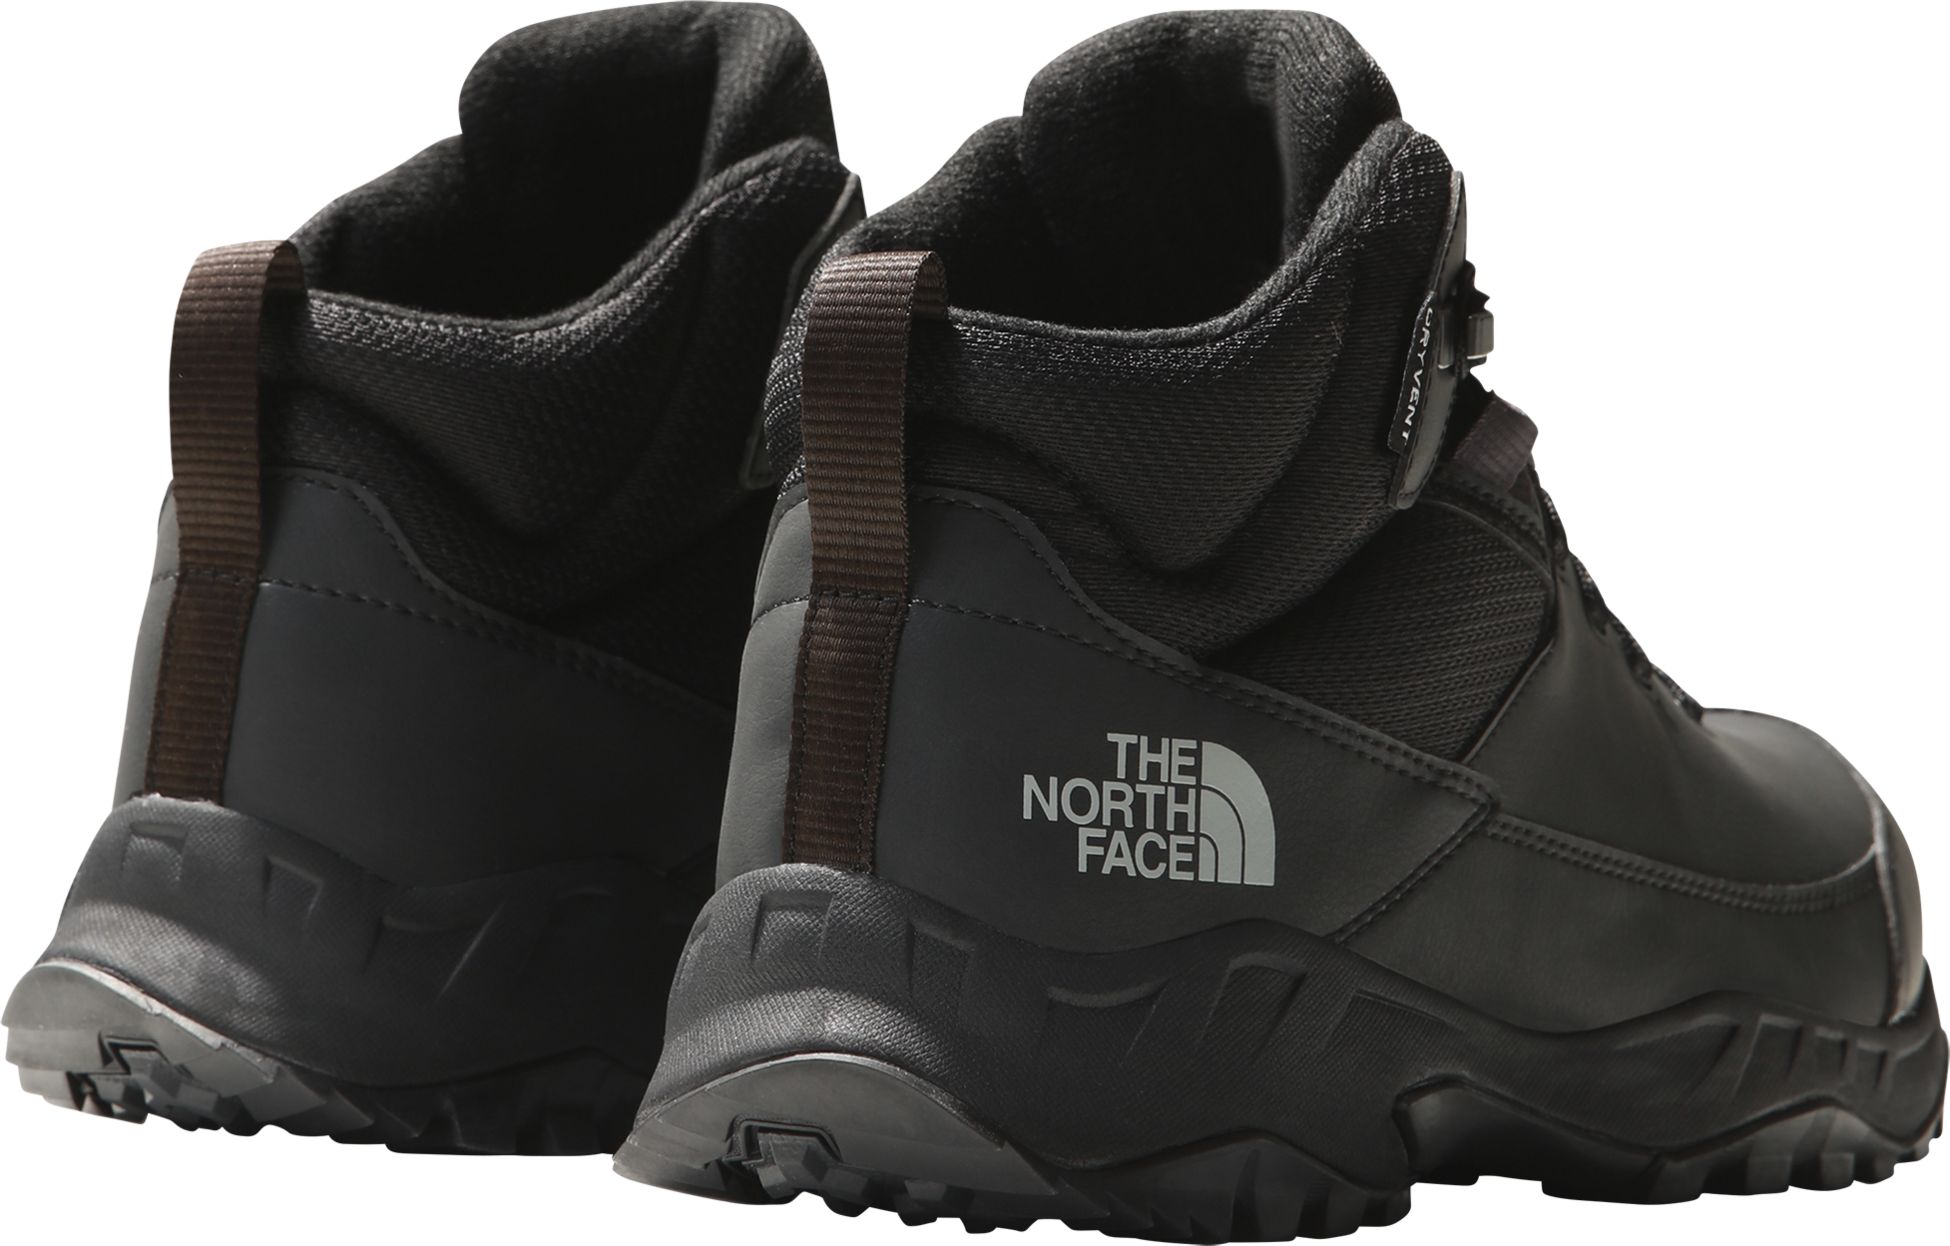 THE NORTH FACE, M STORM STRIKE III WP